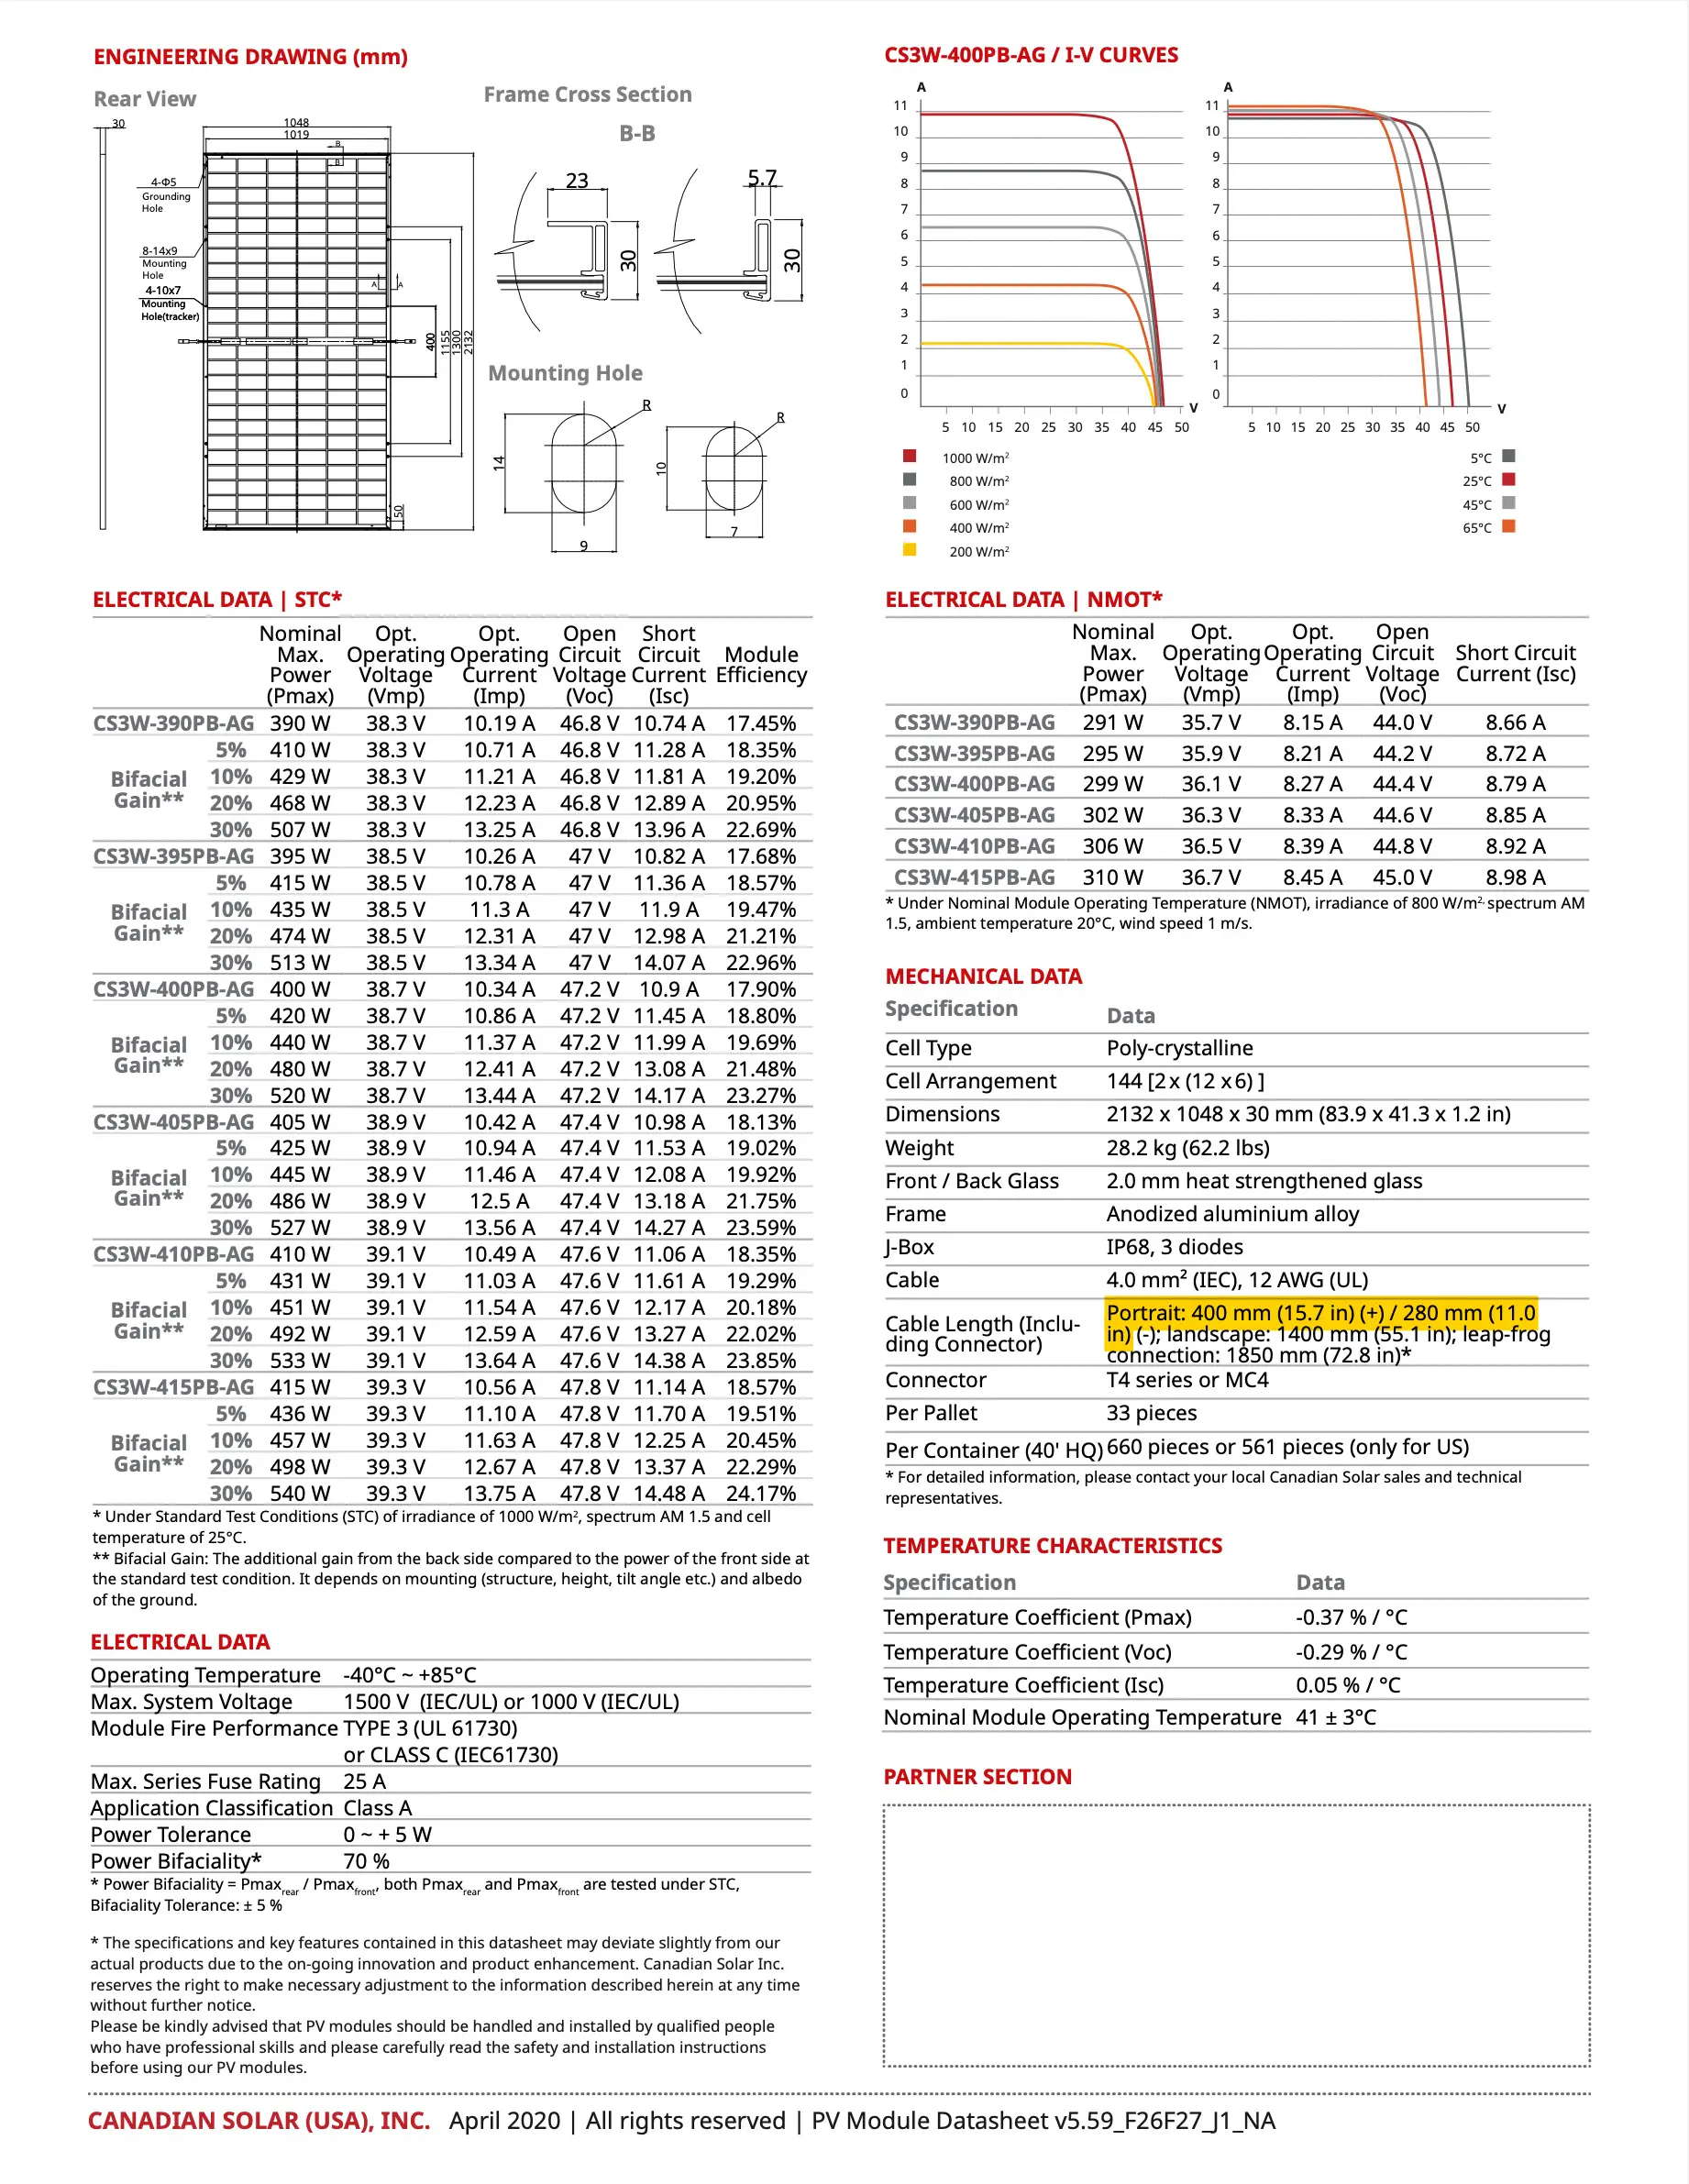 canadian solar panel 410w datasheet - What is the voltage of a 410 watt solar panel